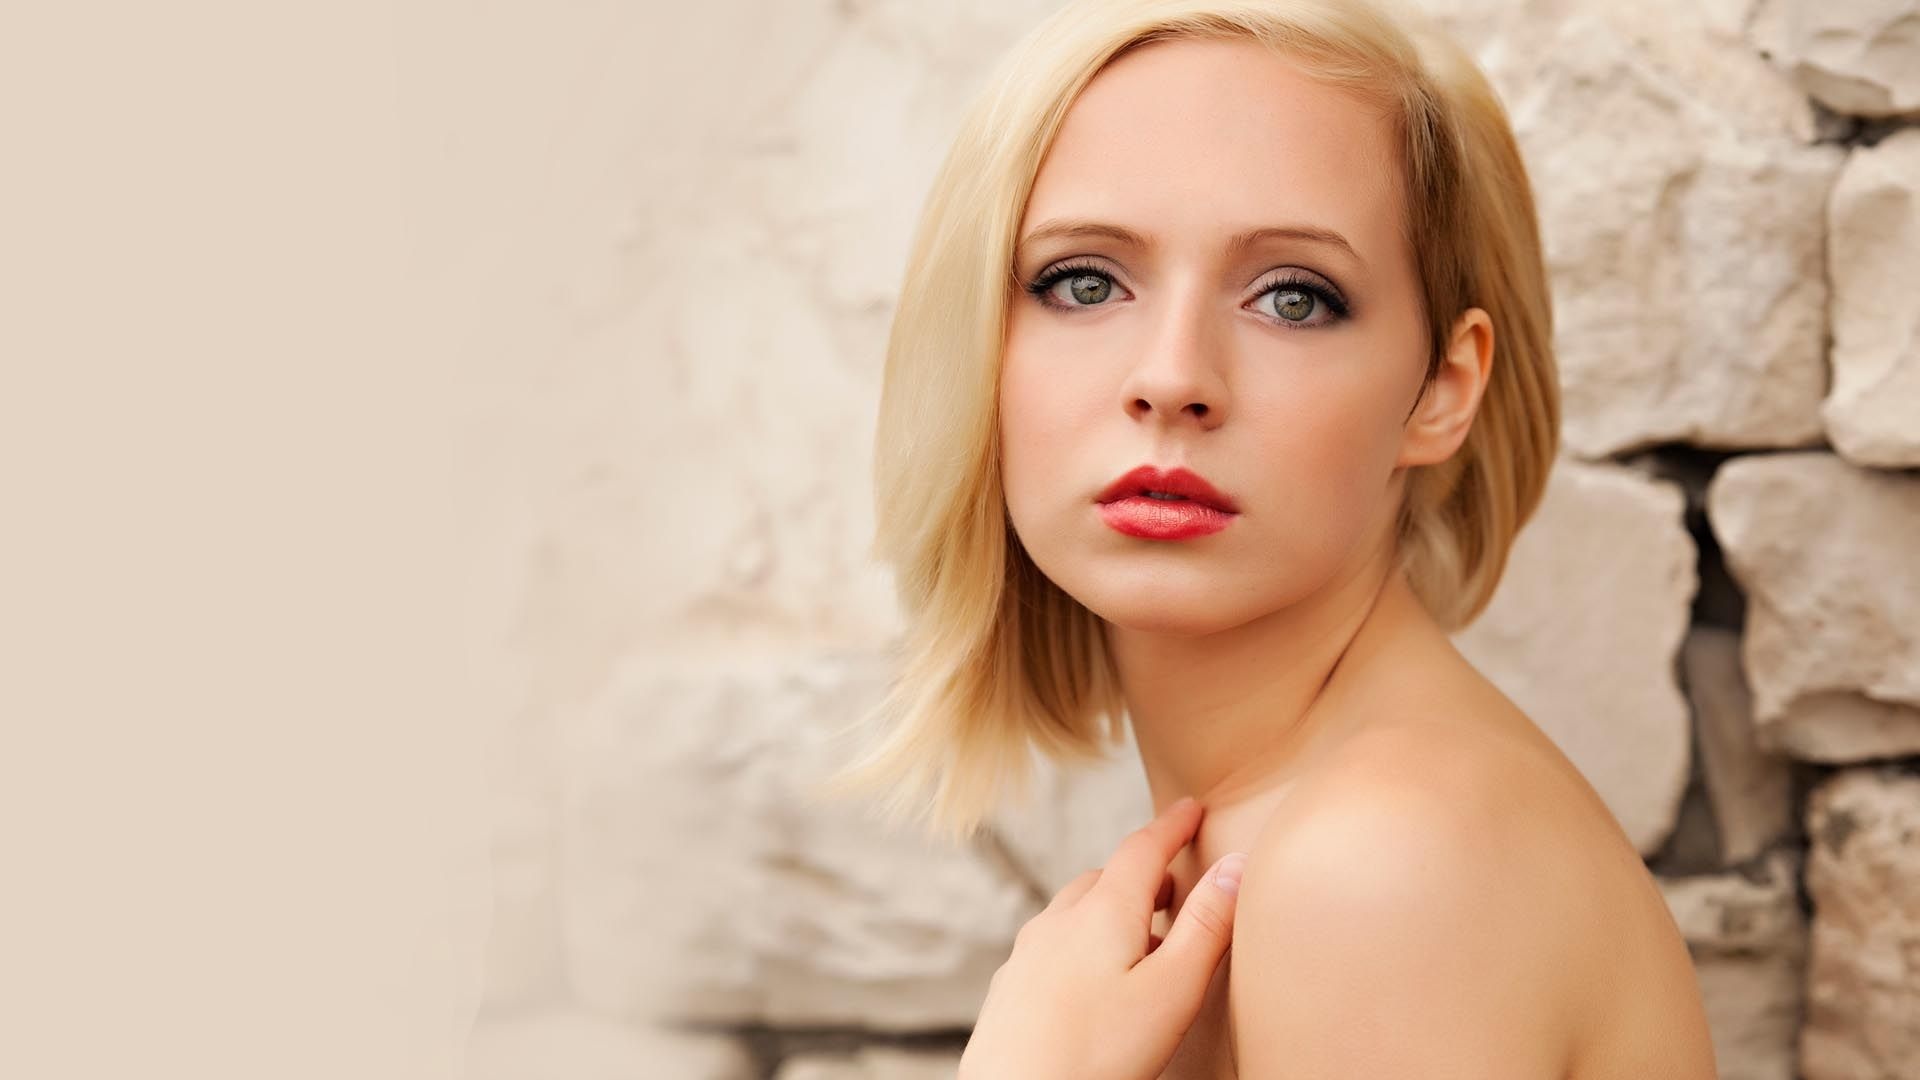 Madilyn Bailey, Captivating wallpapers, Musical talent, Wall of fame, 1920x1080 Full HD Desktop